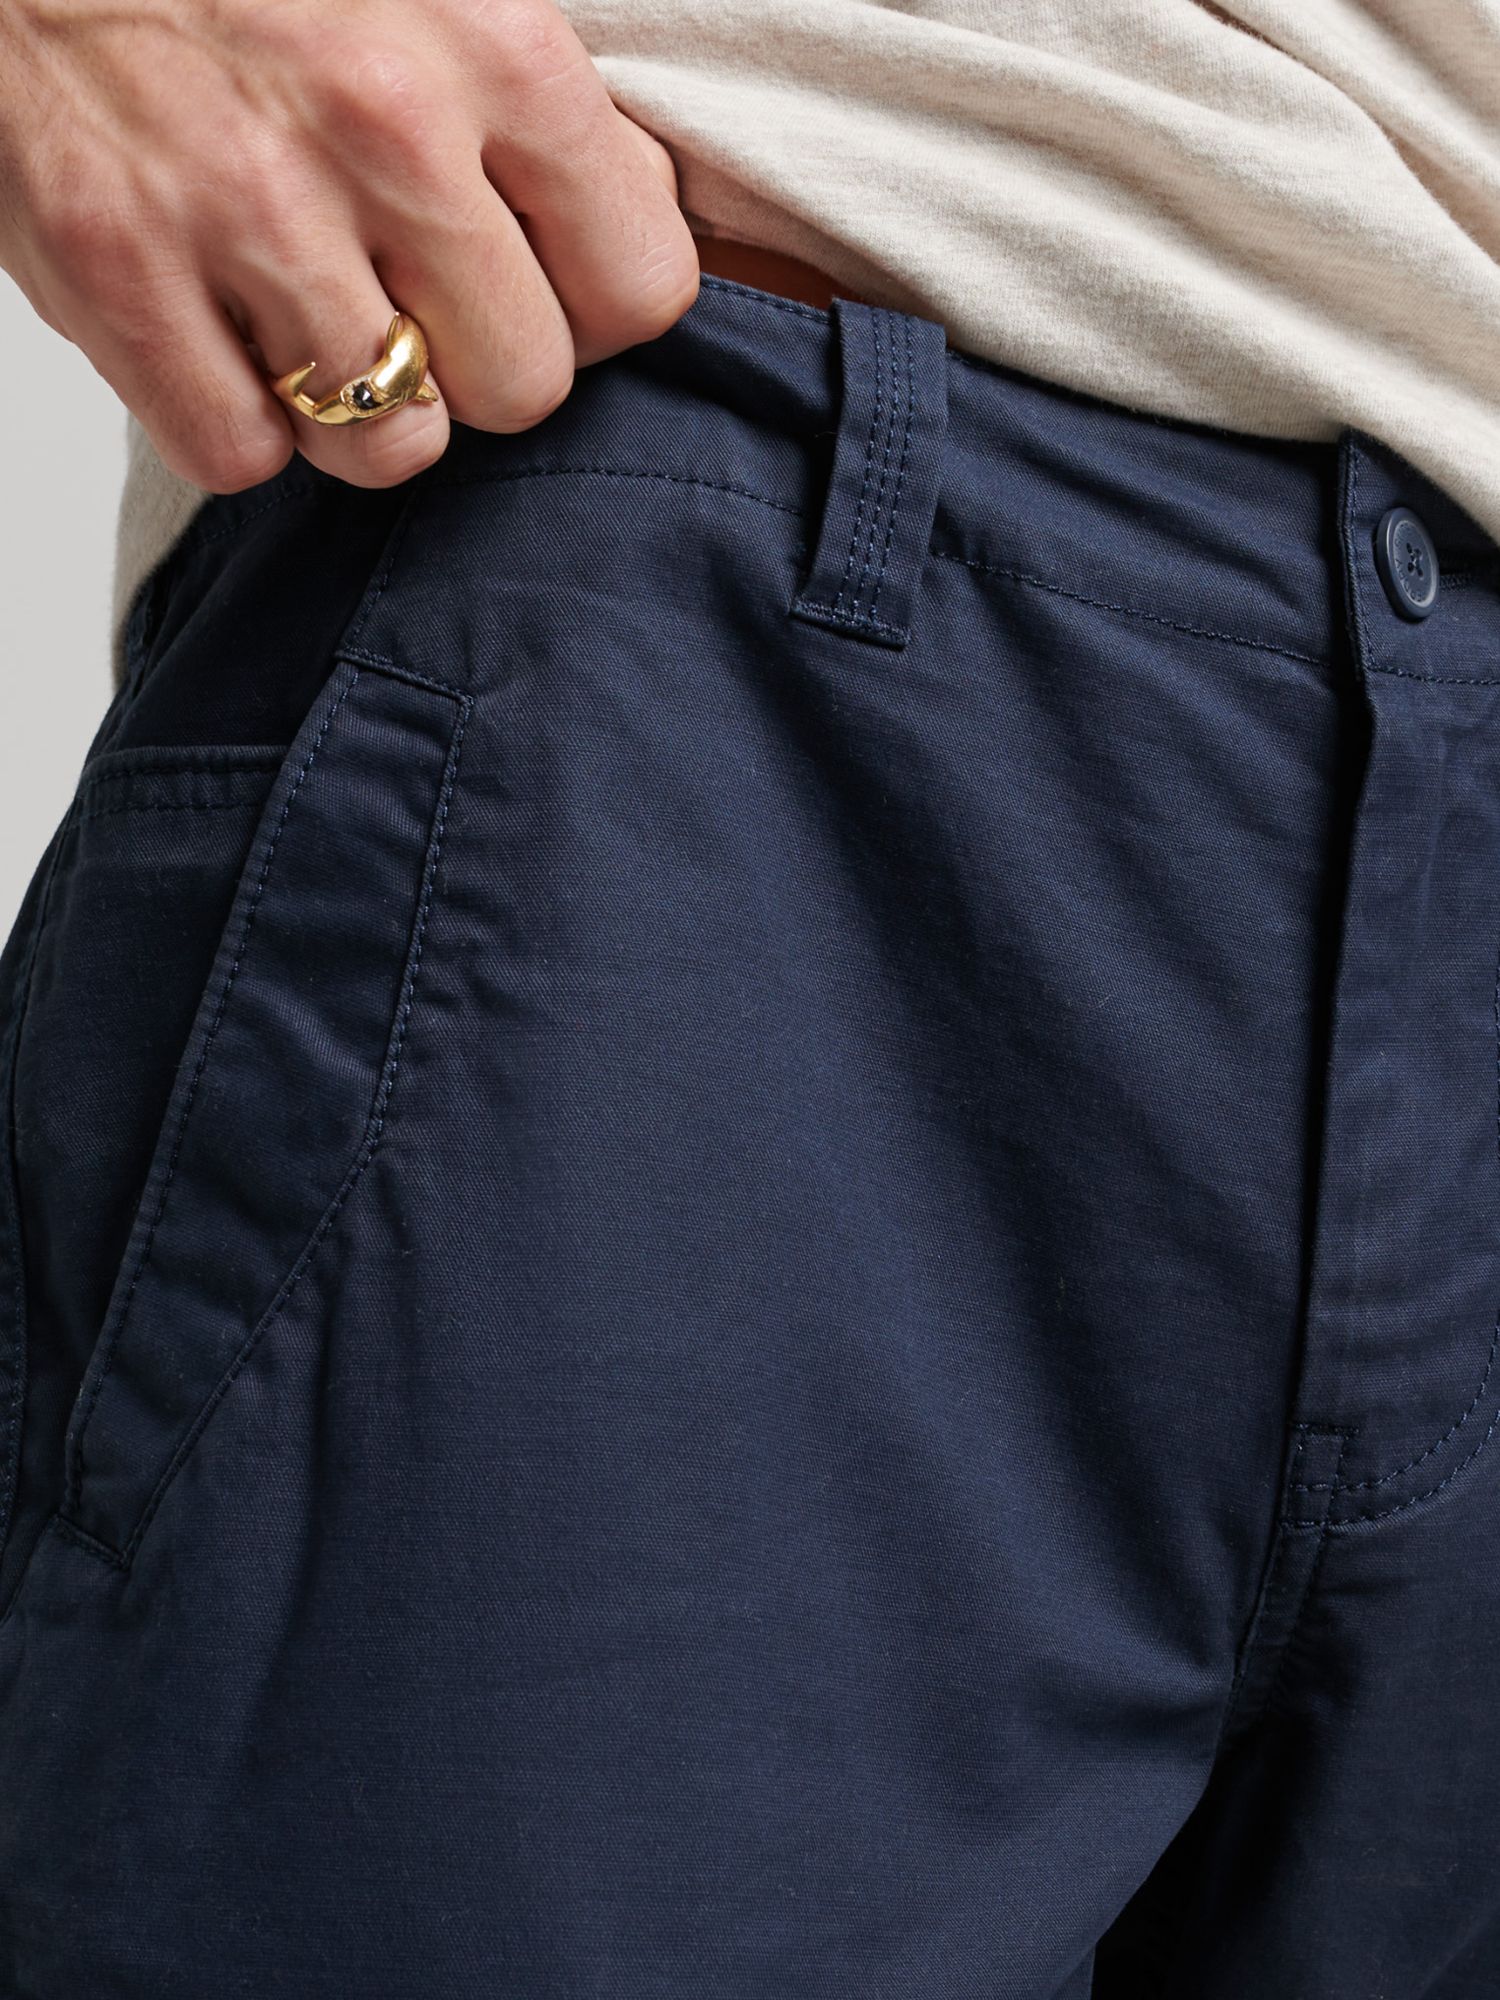 Buy Superdry Organic Cotton Core Cargo Shorts Online at johnlewis.com